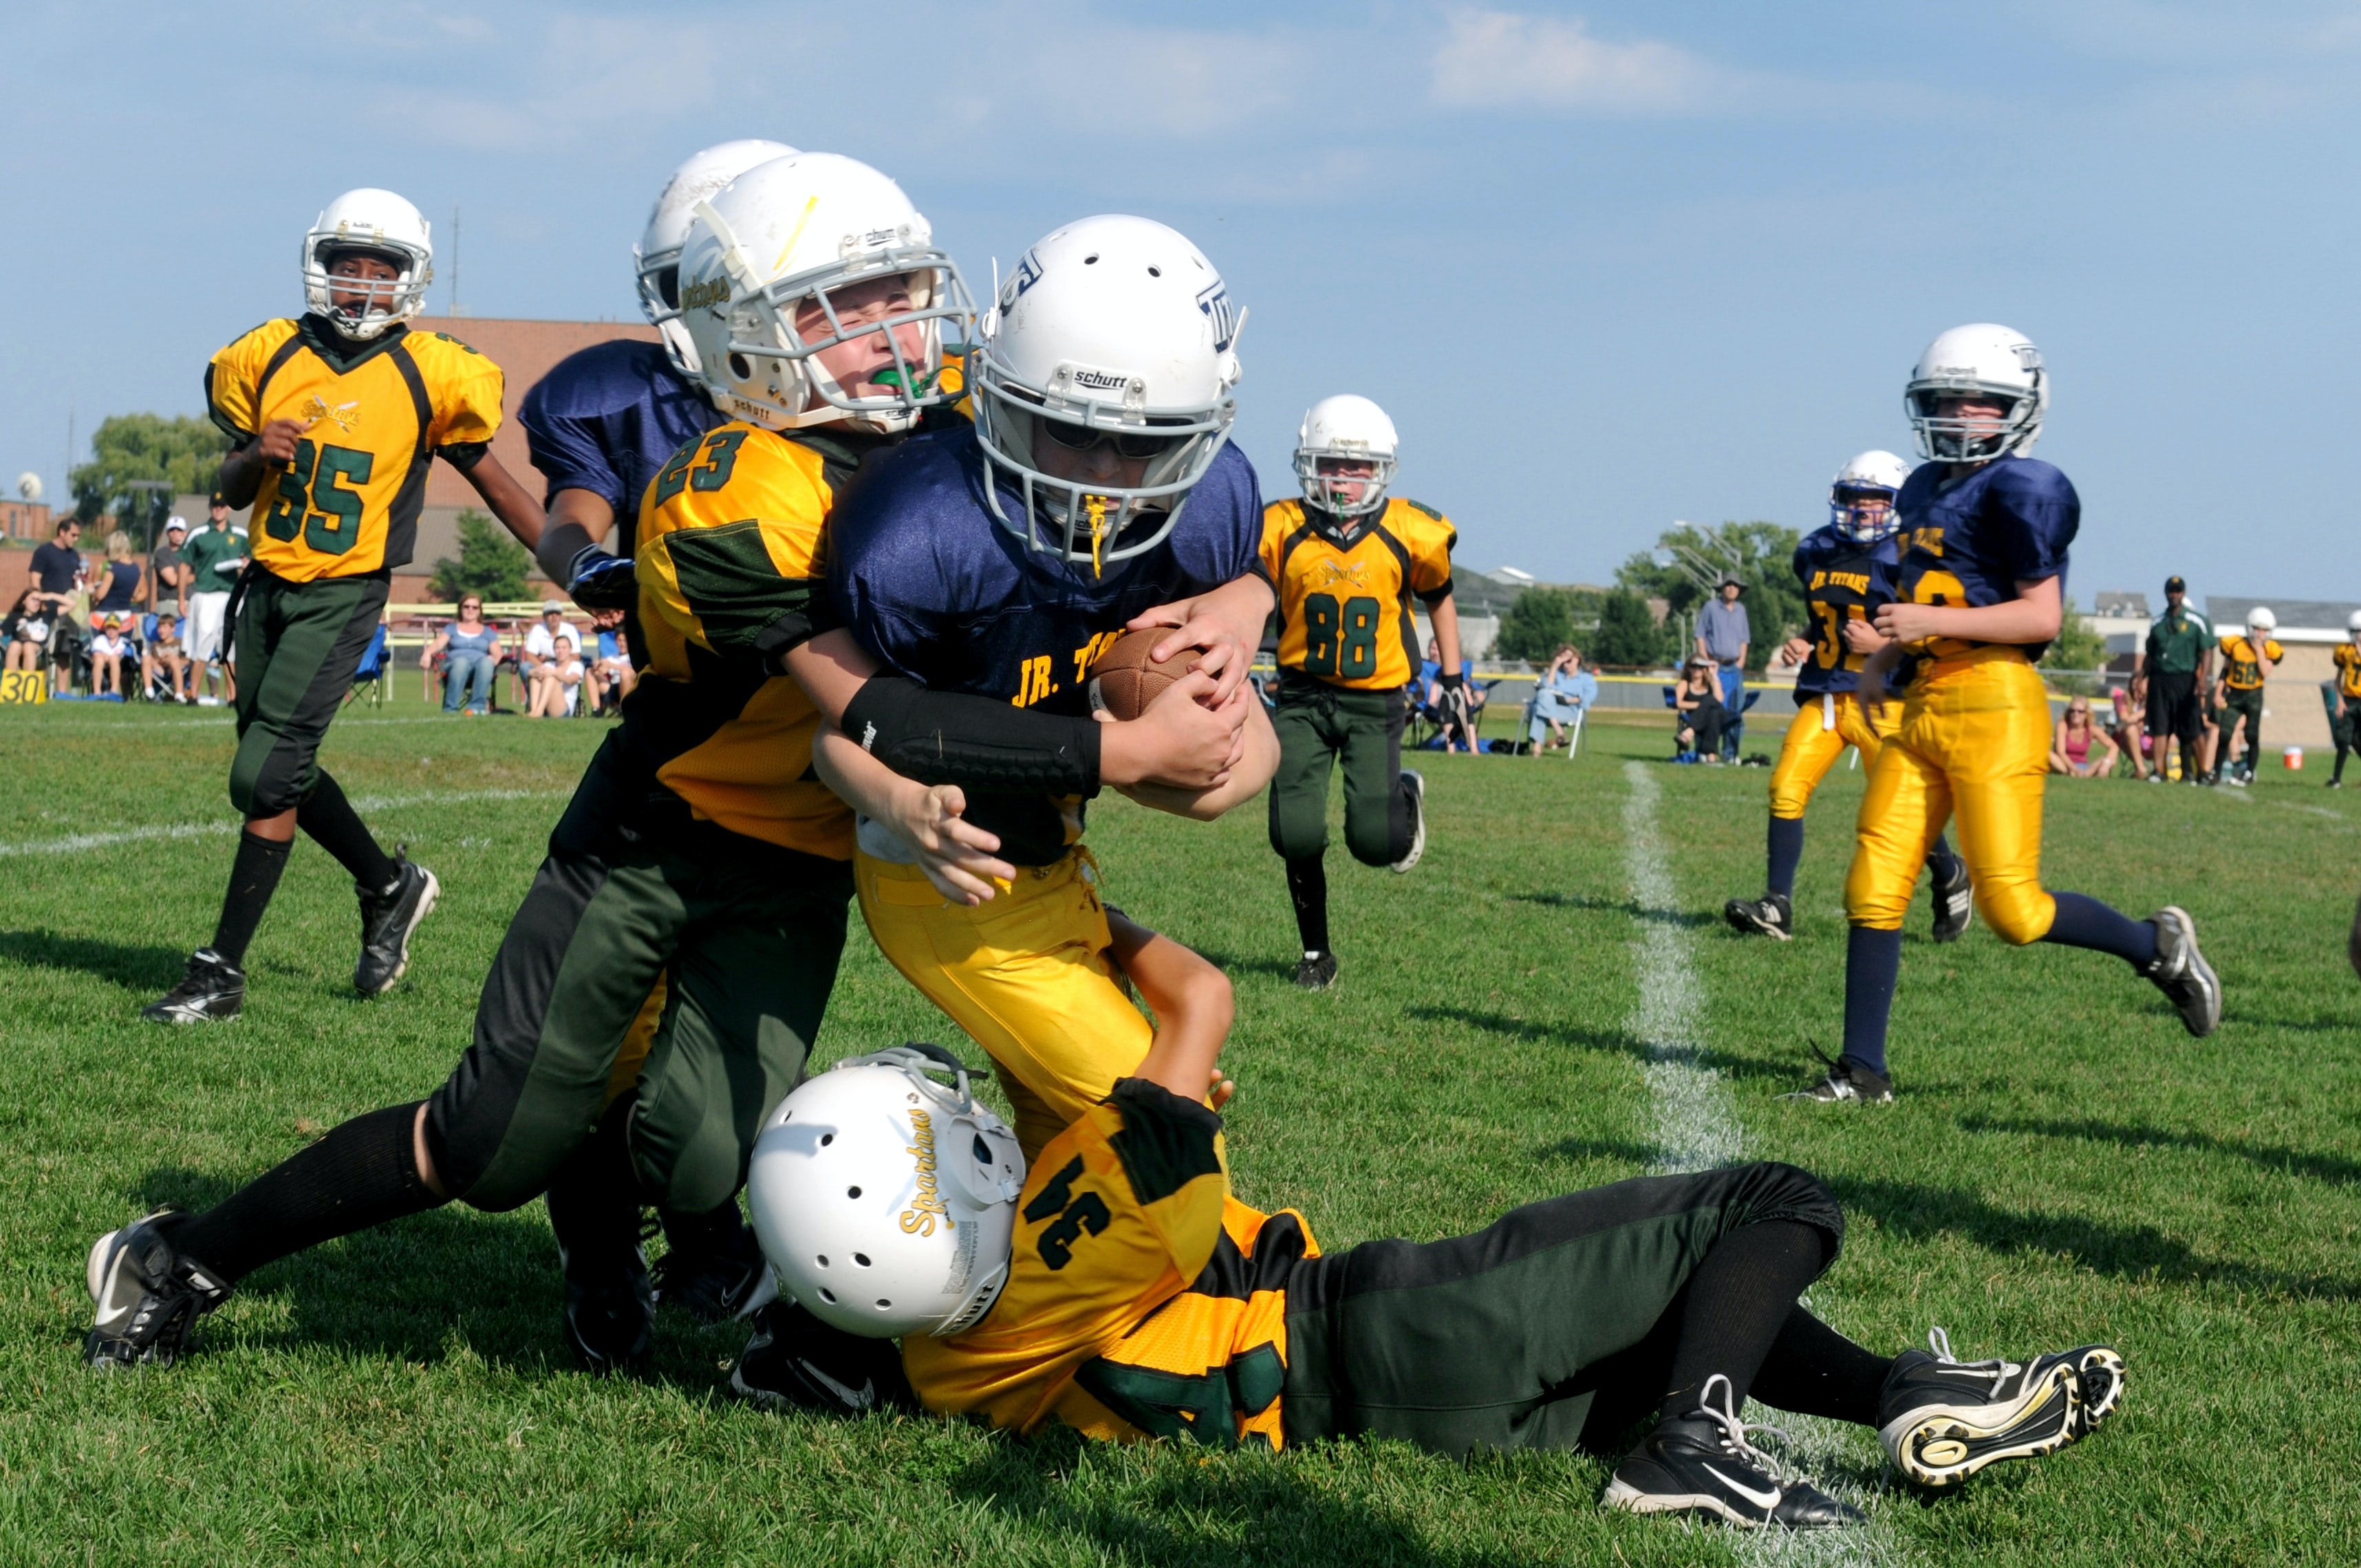 kids playing football preventing abuse in youth sports